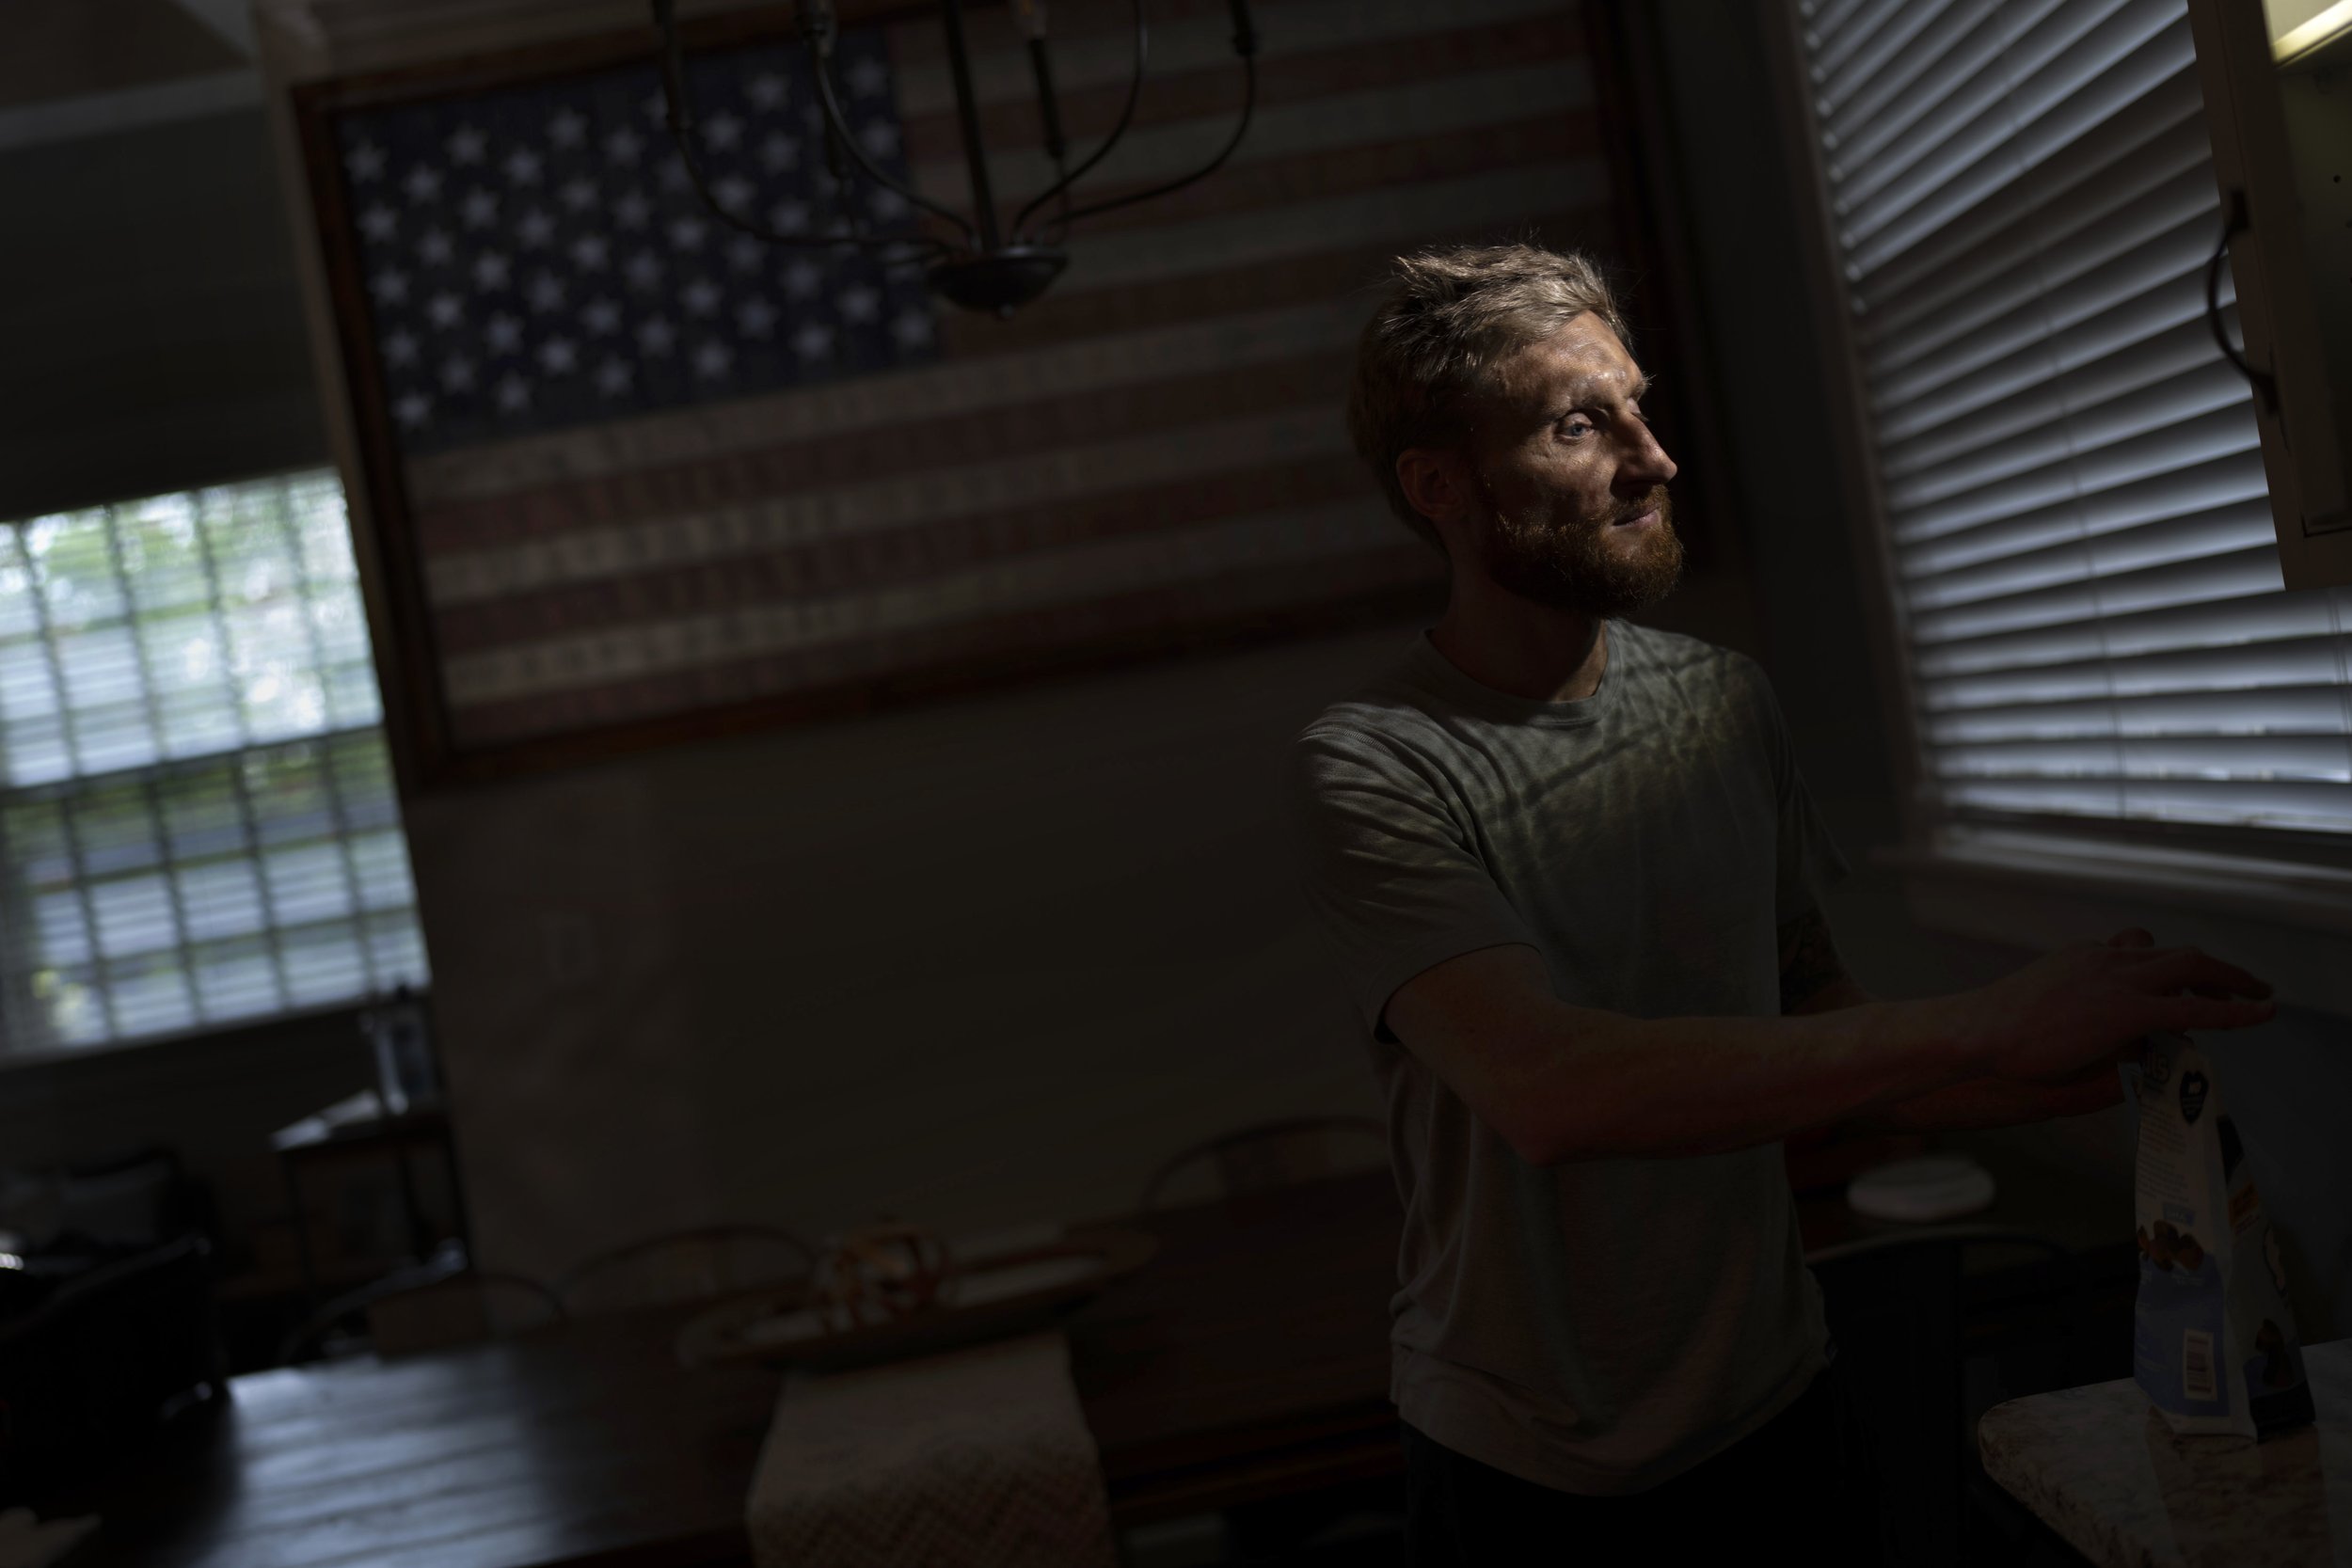  Brad Snyder, a Navy explosives expert who was blinded in a mine explosion in Afghanistan in 2011, prepares tea for his wife in their Princeton, N.J., home on Aug. 4, 2021. Snyder won the gold medal in the Triathlon PTV1 at the Paralympics in Tokyo o